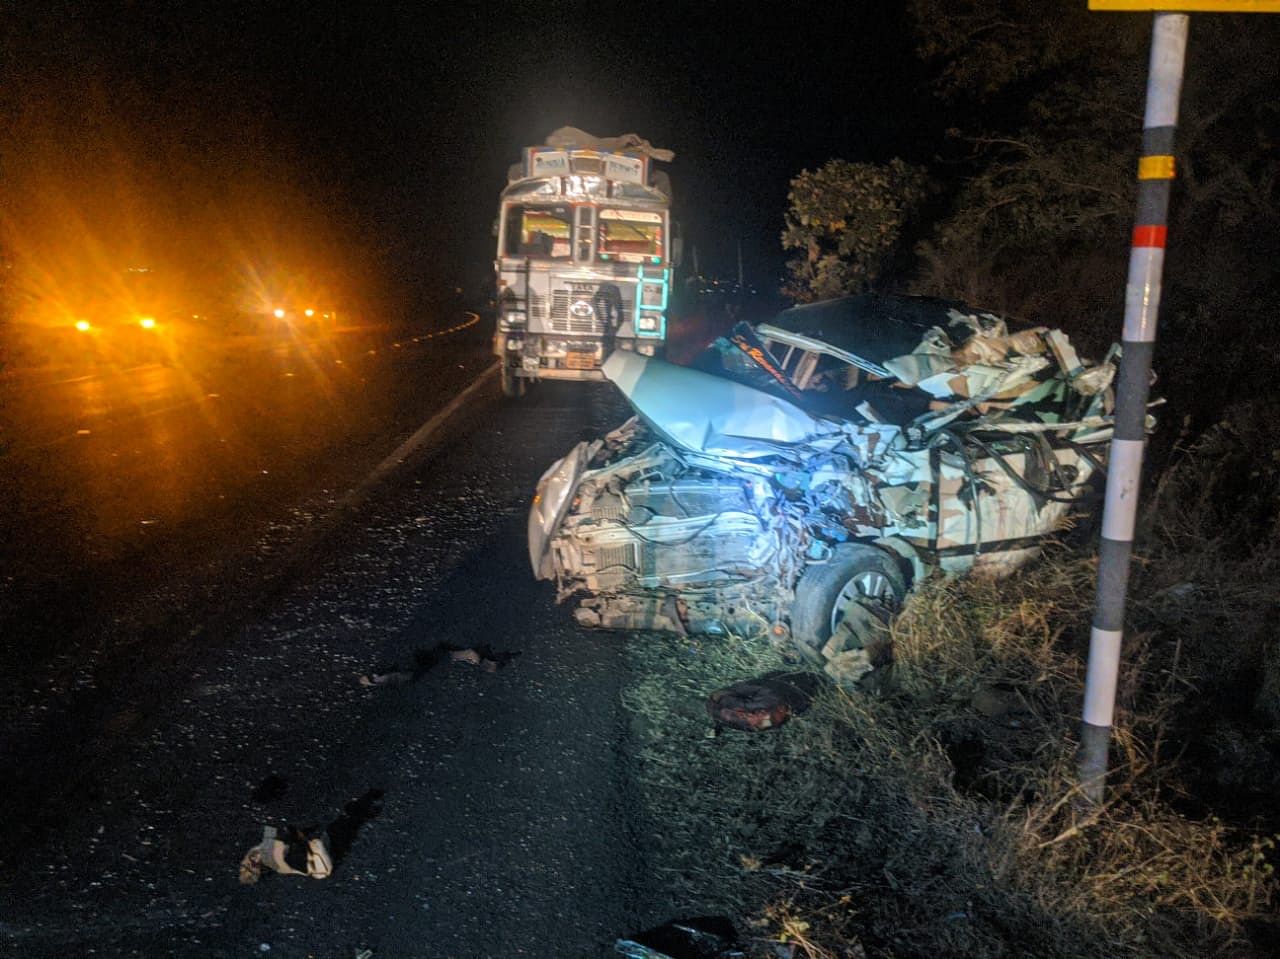 Superintendent of Police Lada Martin Marbaniang said the car was heading towards Kalaburagi from Humnabad while the lorry was going to Bidar from Kalaburagi when the accident occurred. (DH Photo)